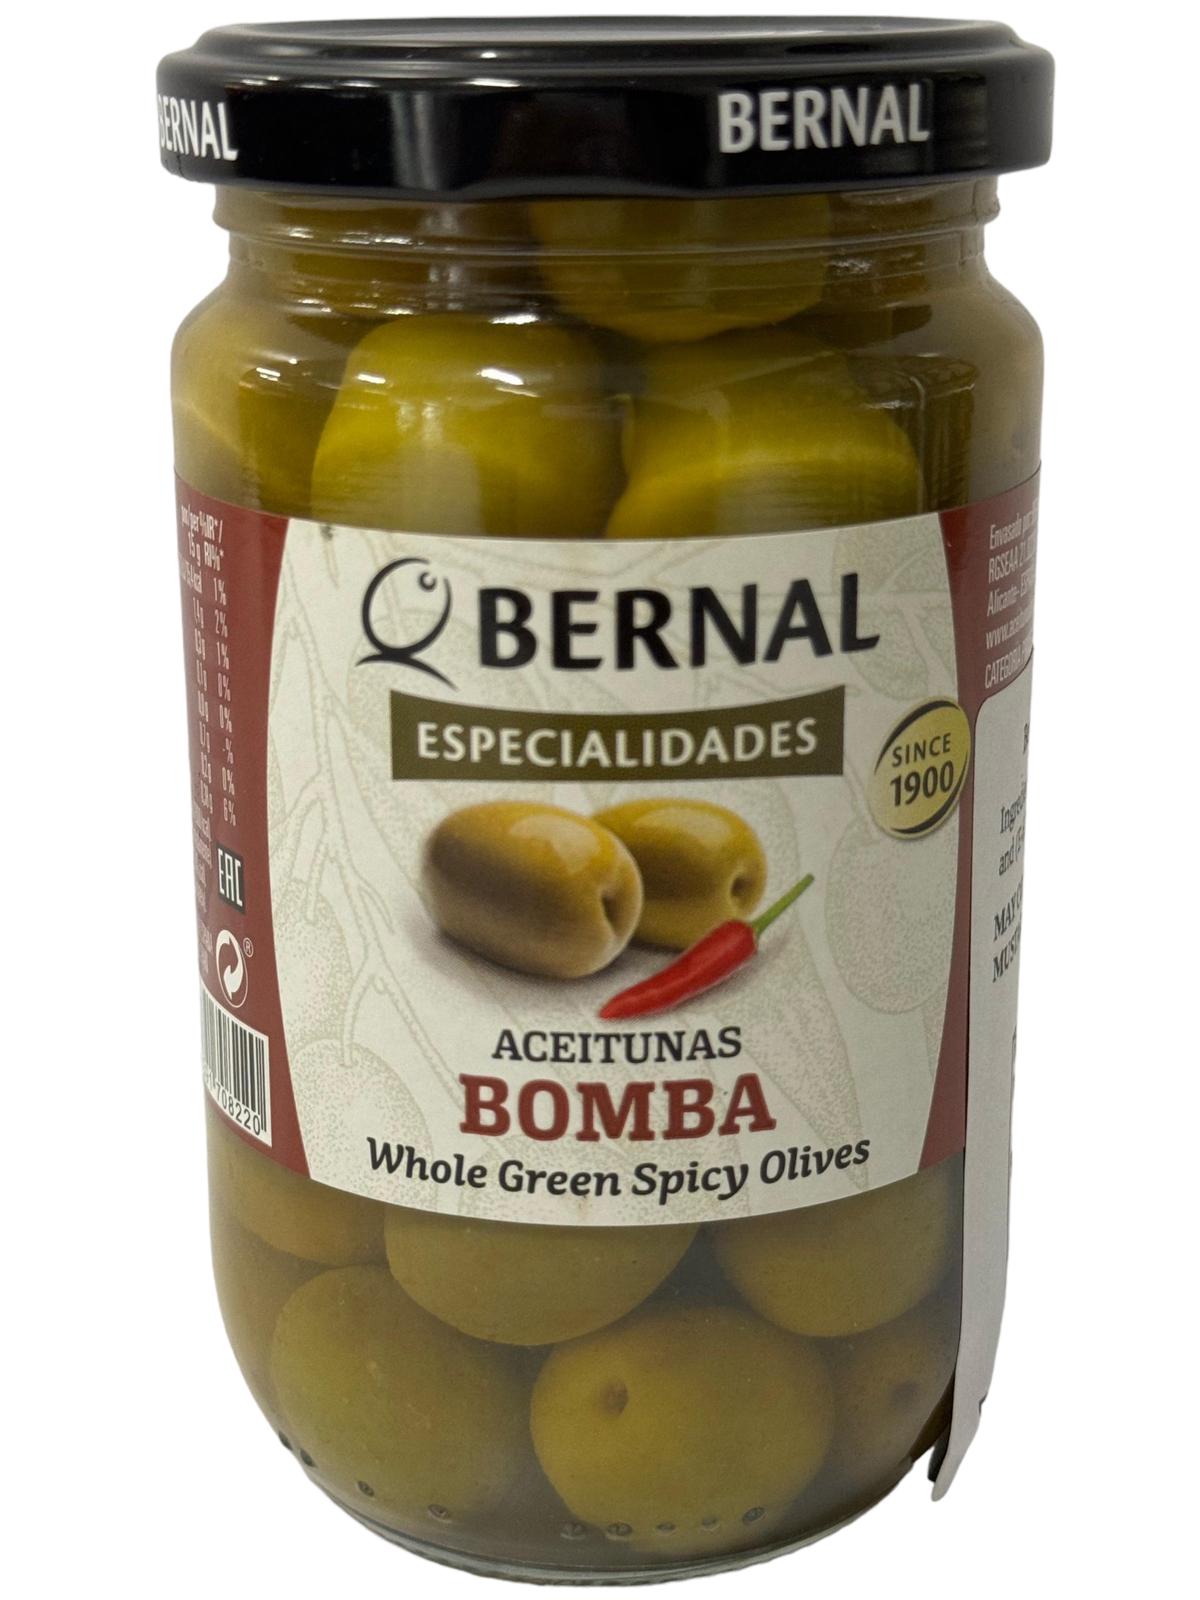 Bernal Especialidades Aceitunas Bomba Whole Green Spicy Olives 300g Best Before Nov 2025